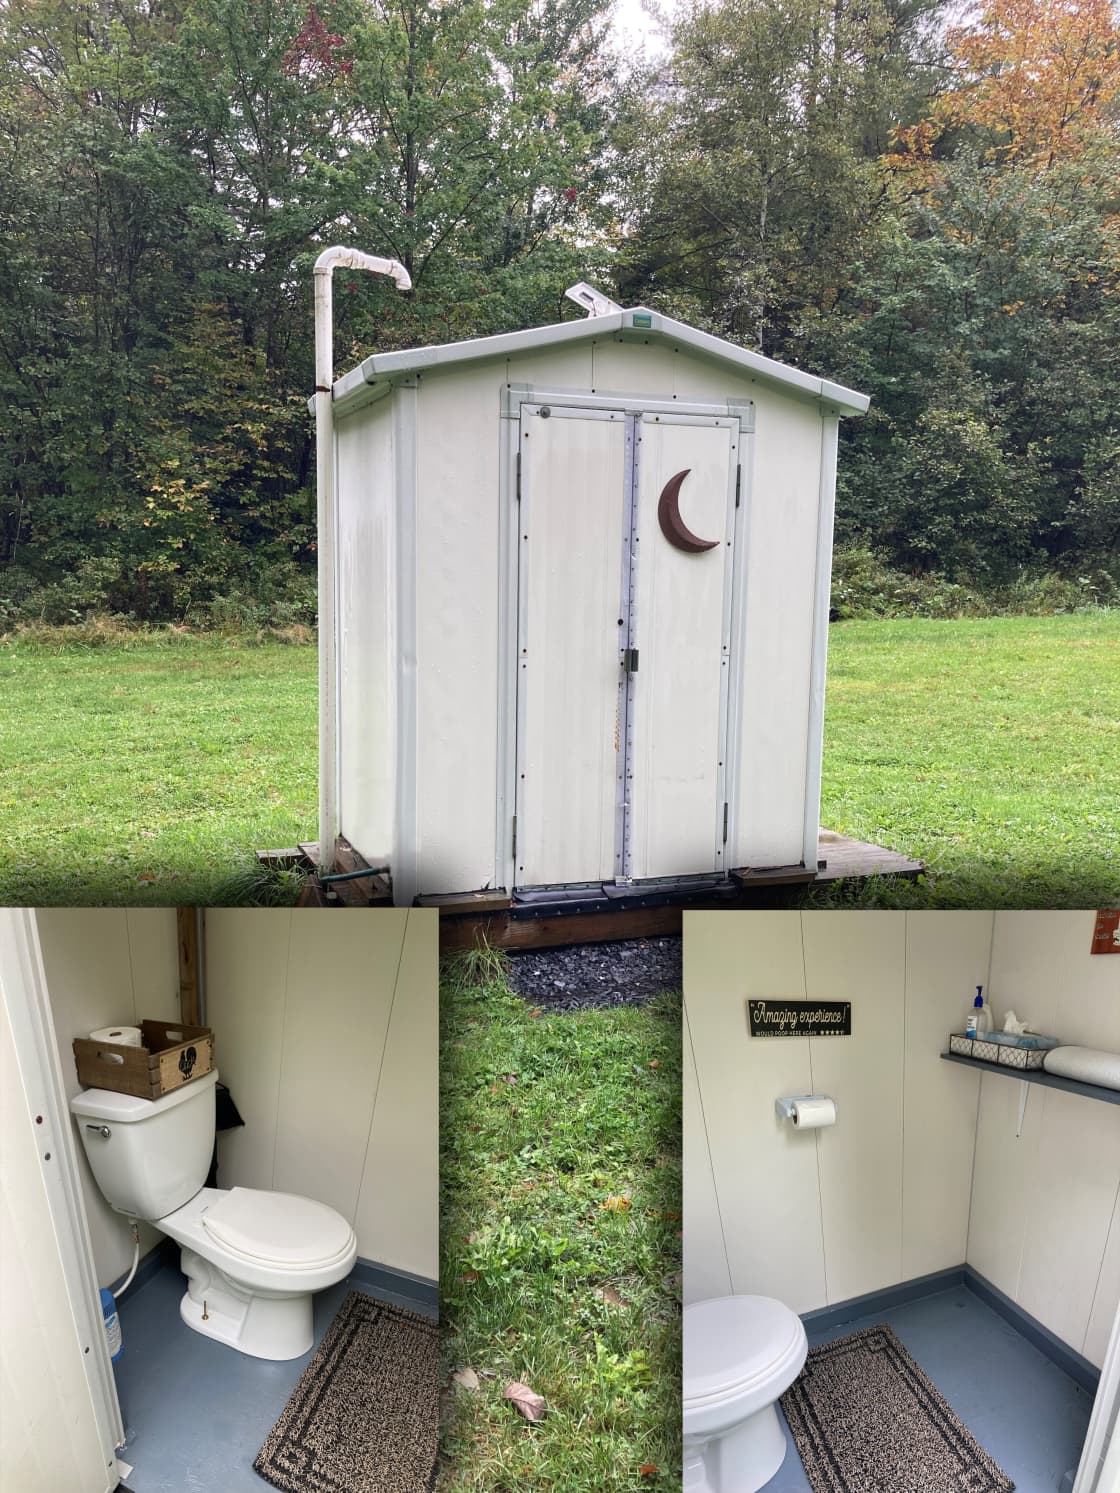 Outhouse with flush toilet - we keep this very tidy.